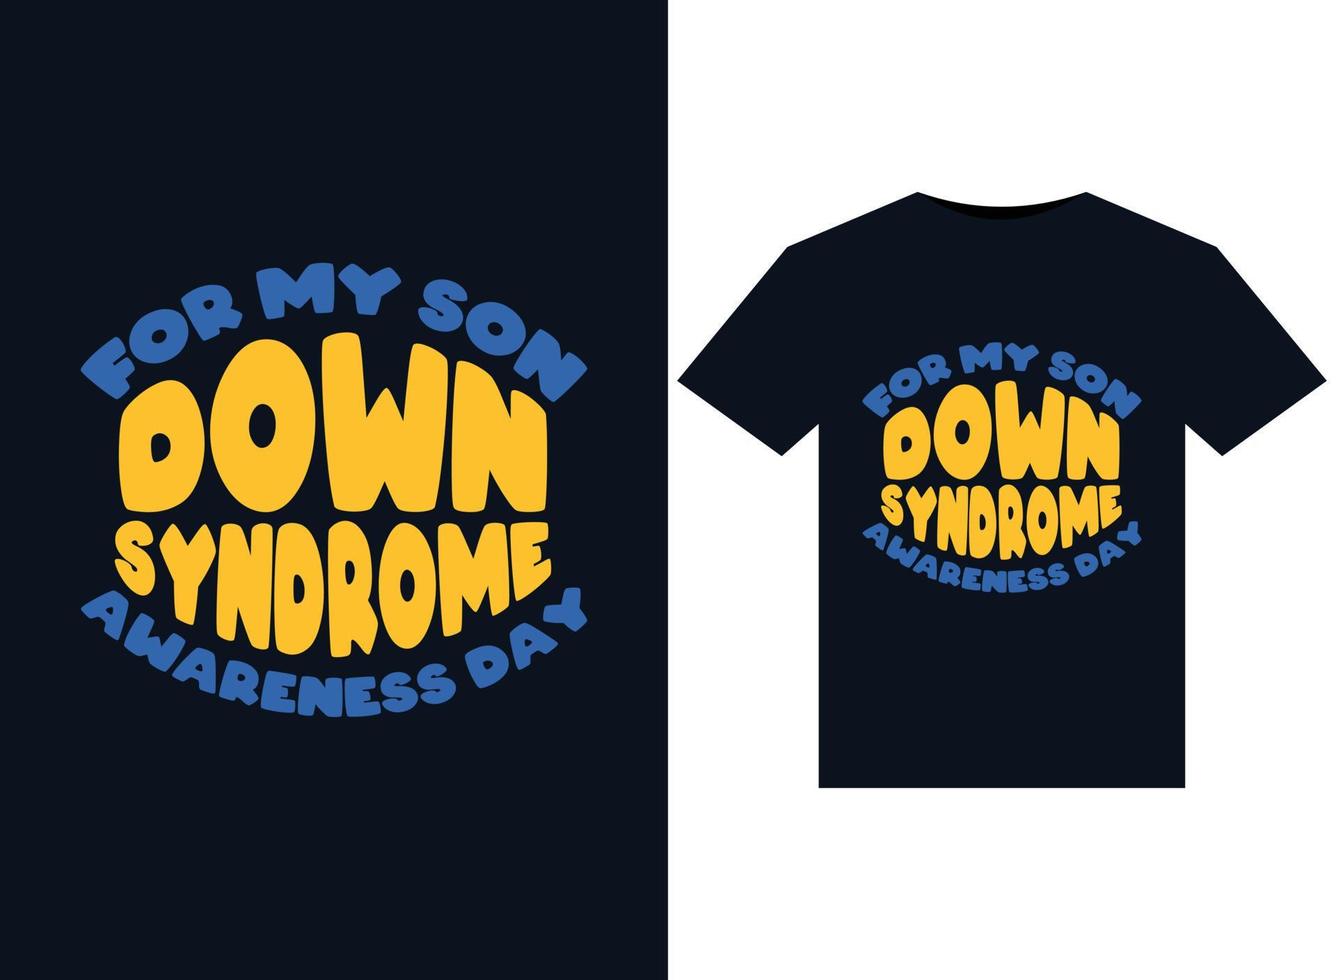 For My Son Down Syndrome Awareness Day illustrations for print-ready T-Shirts design vector